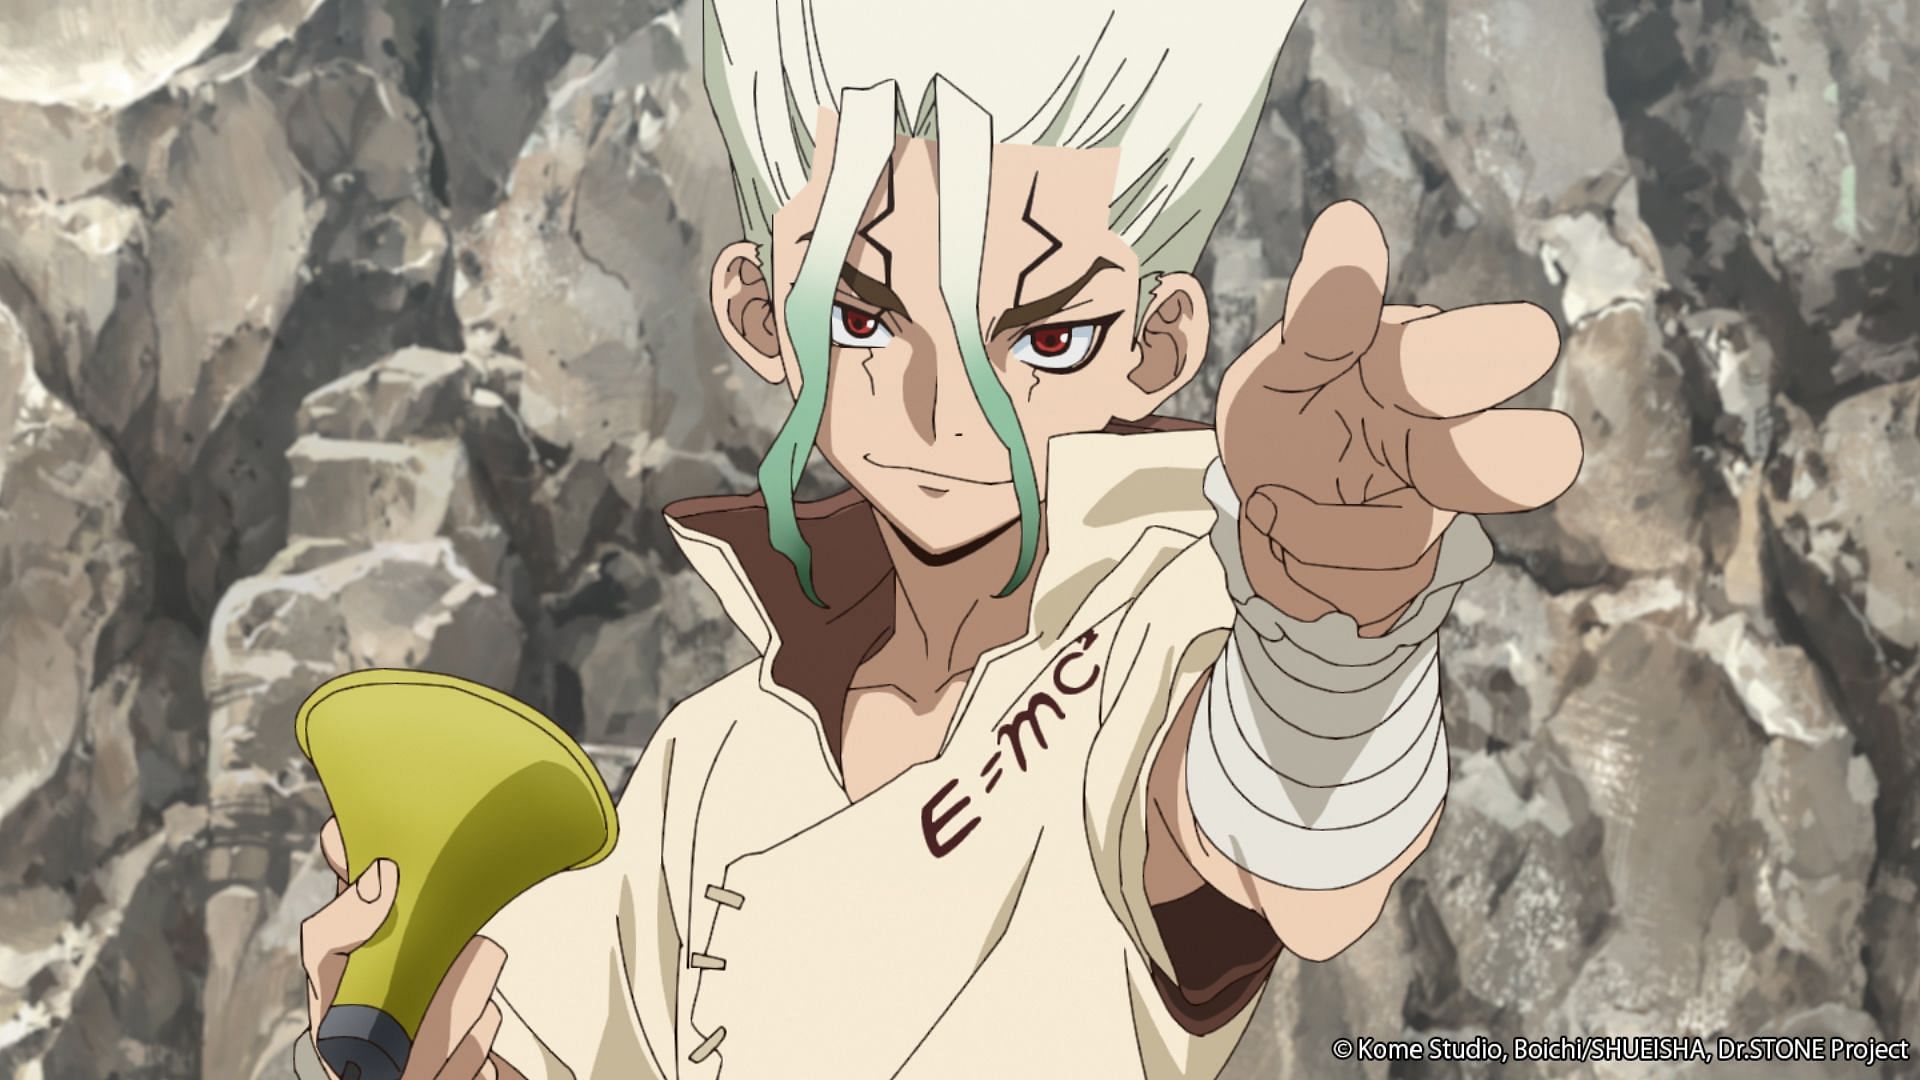 Dr. Stone Season 3 Episode 18 Release Date and Predictions